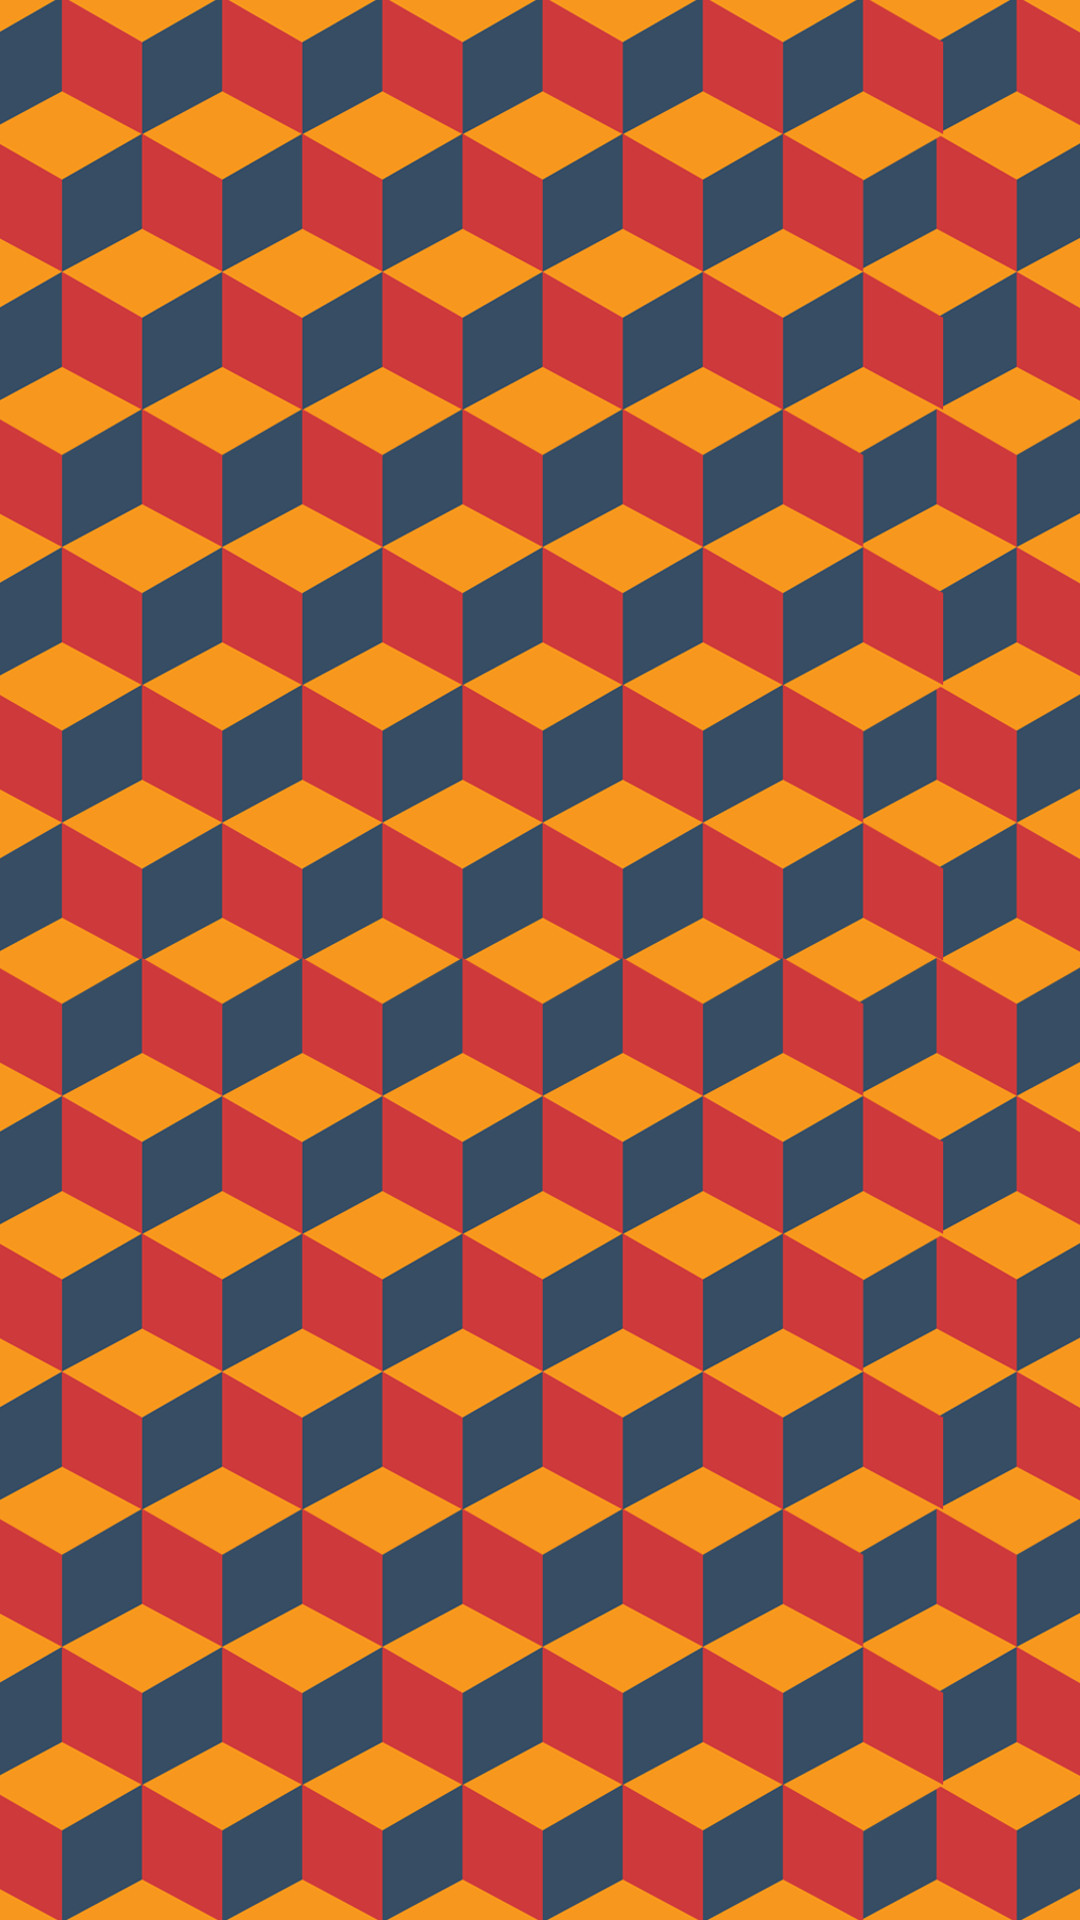 1080x1920 Tap image for more iPhone pattern background! Fantastic Geometric -  @mobile9 | Wallpapers for